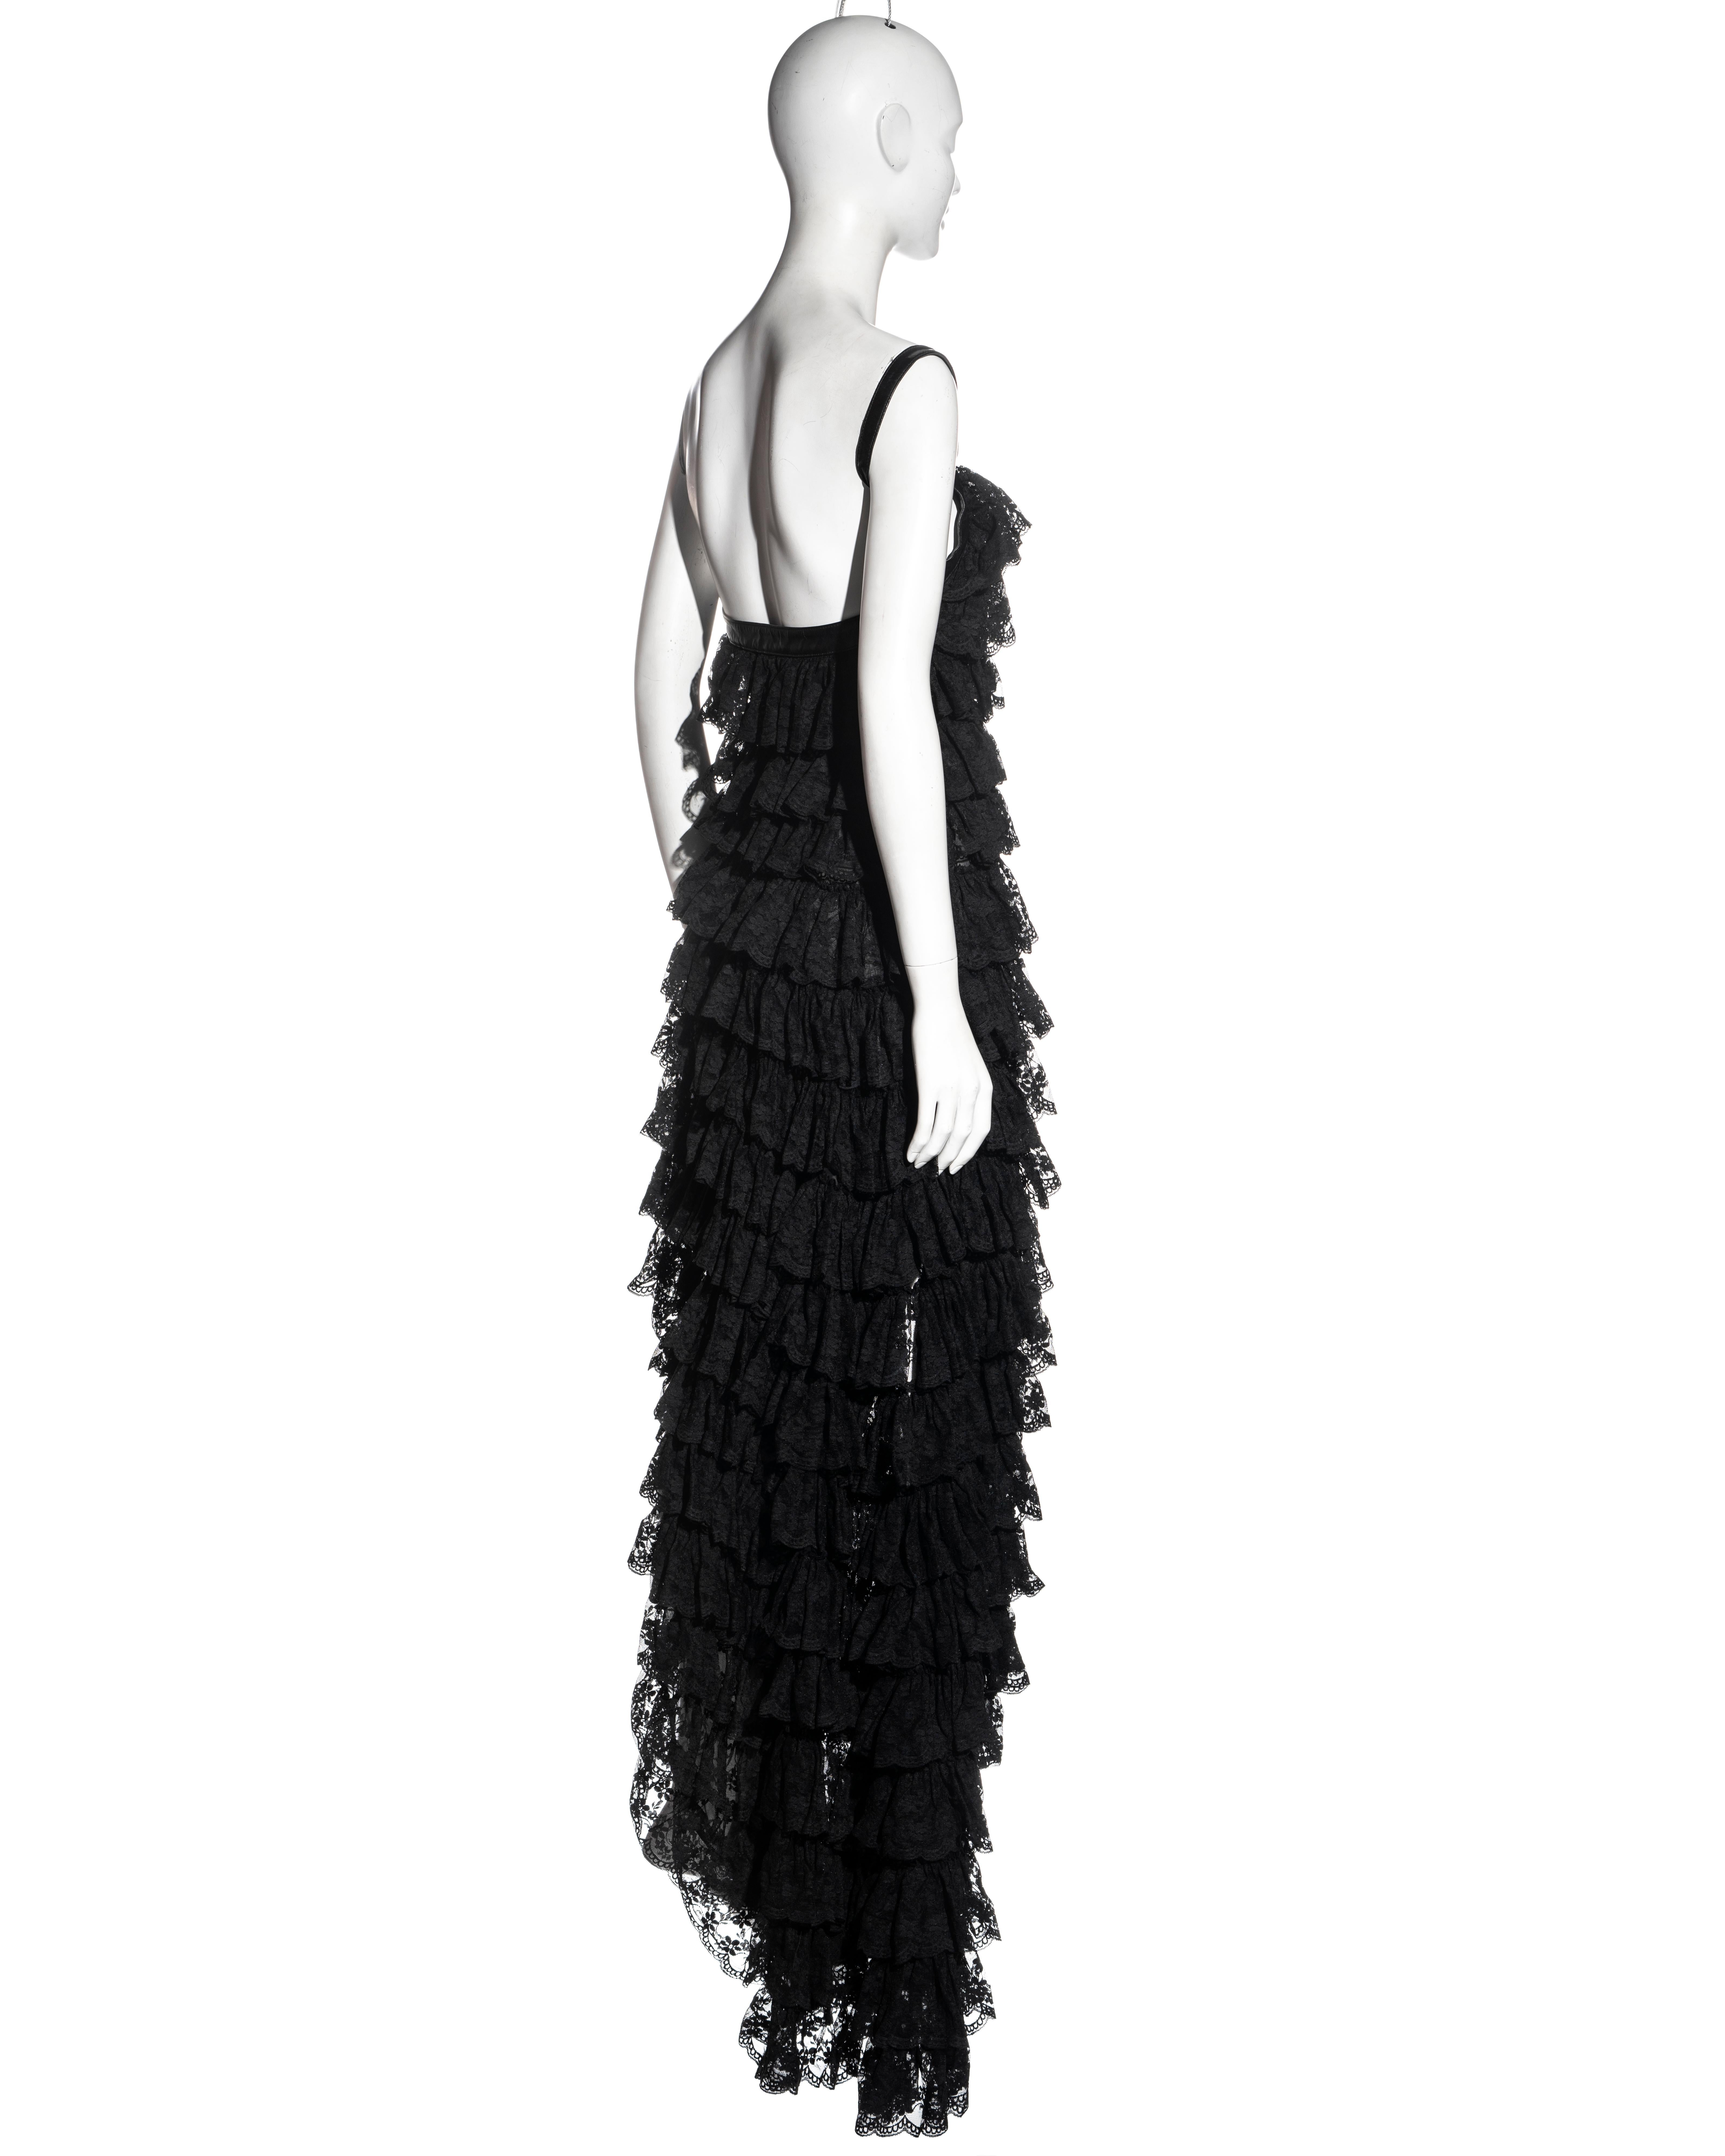 Alexander McQueen black lace and leather evening dress, ss 1999 4